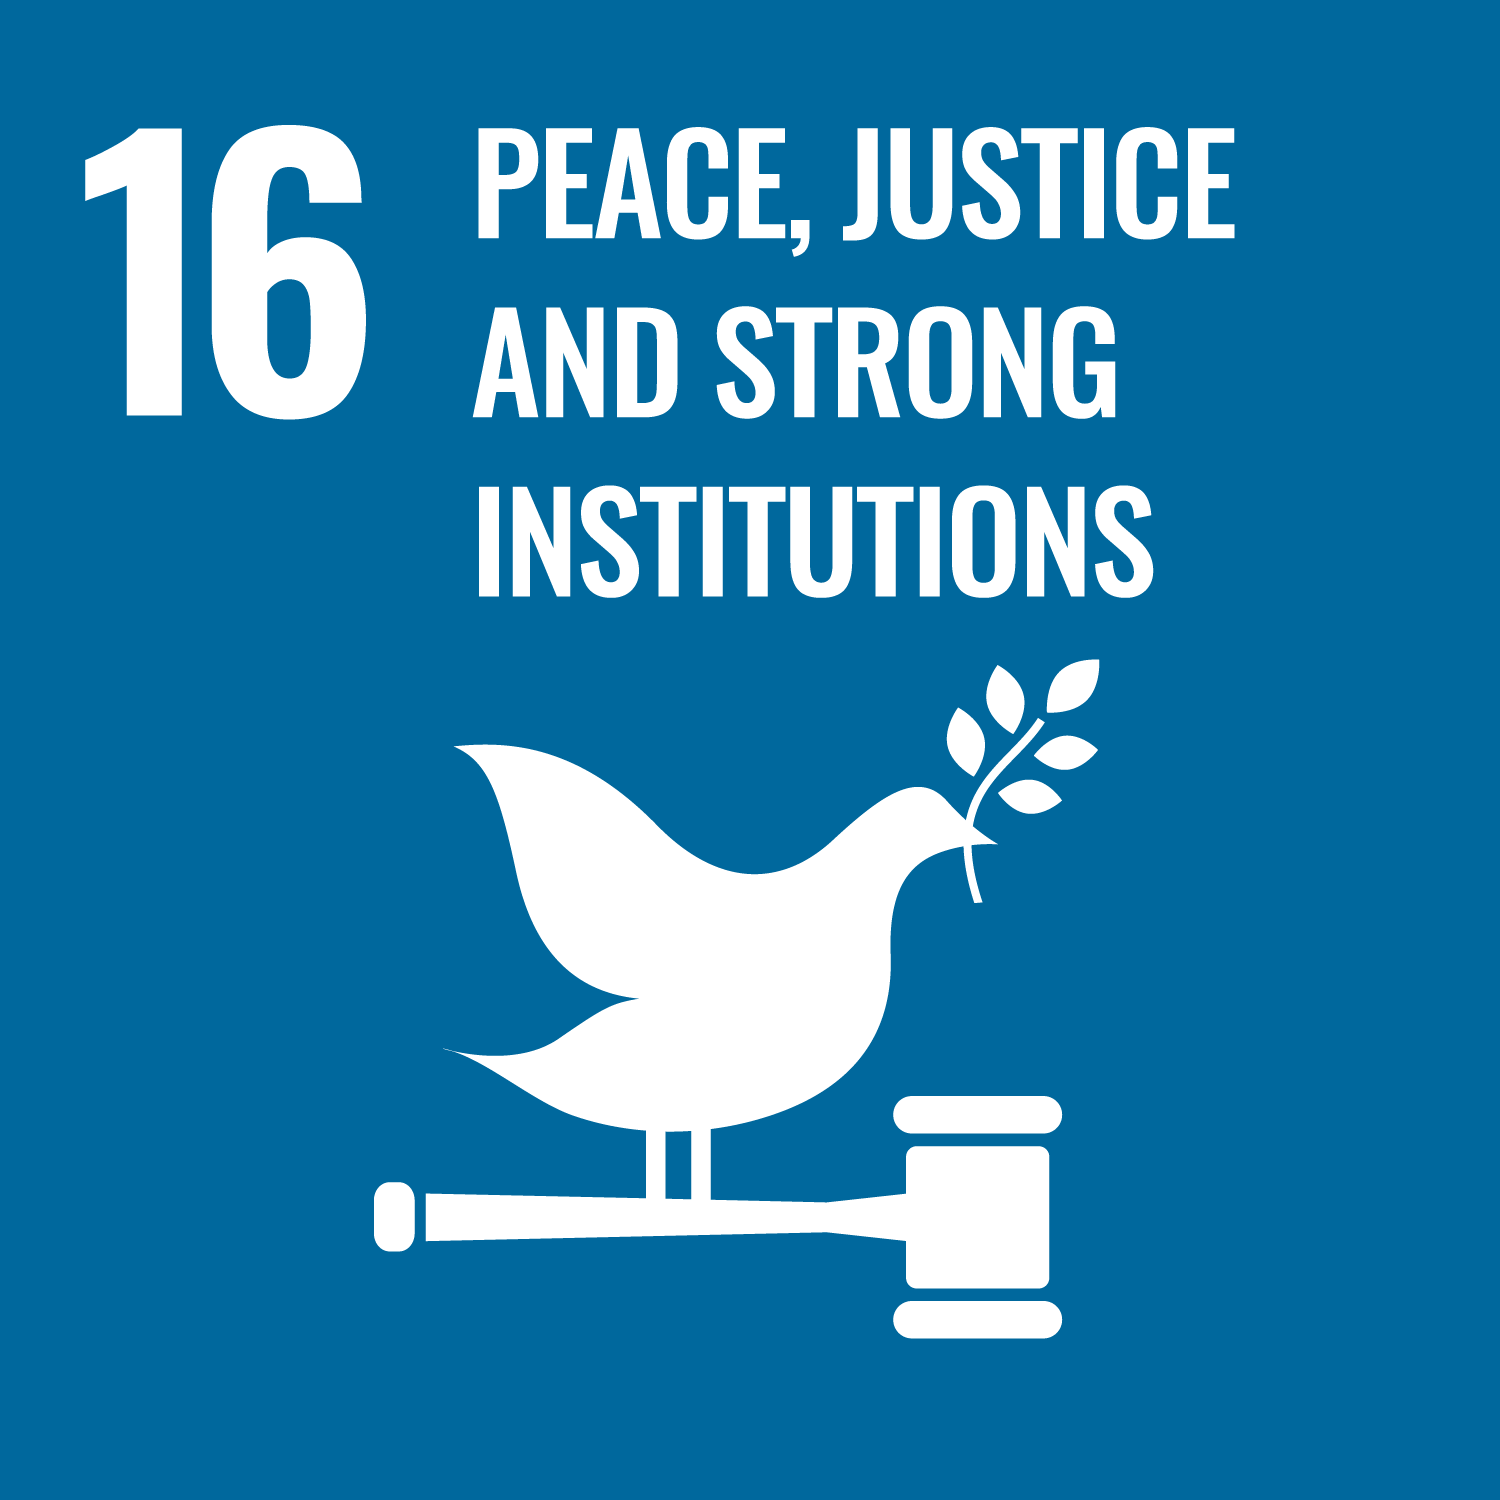 United Nation's 17 Sustainable Development Goals goal number 16